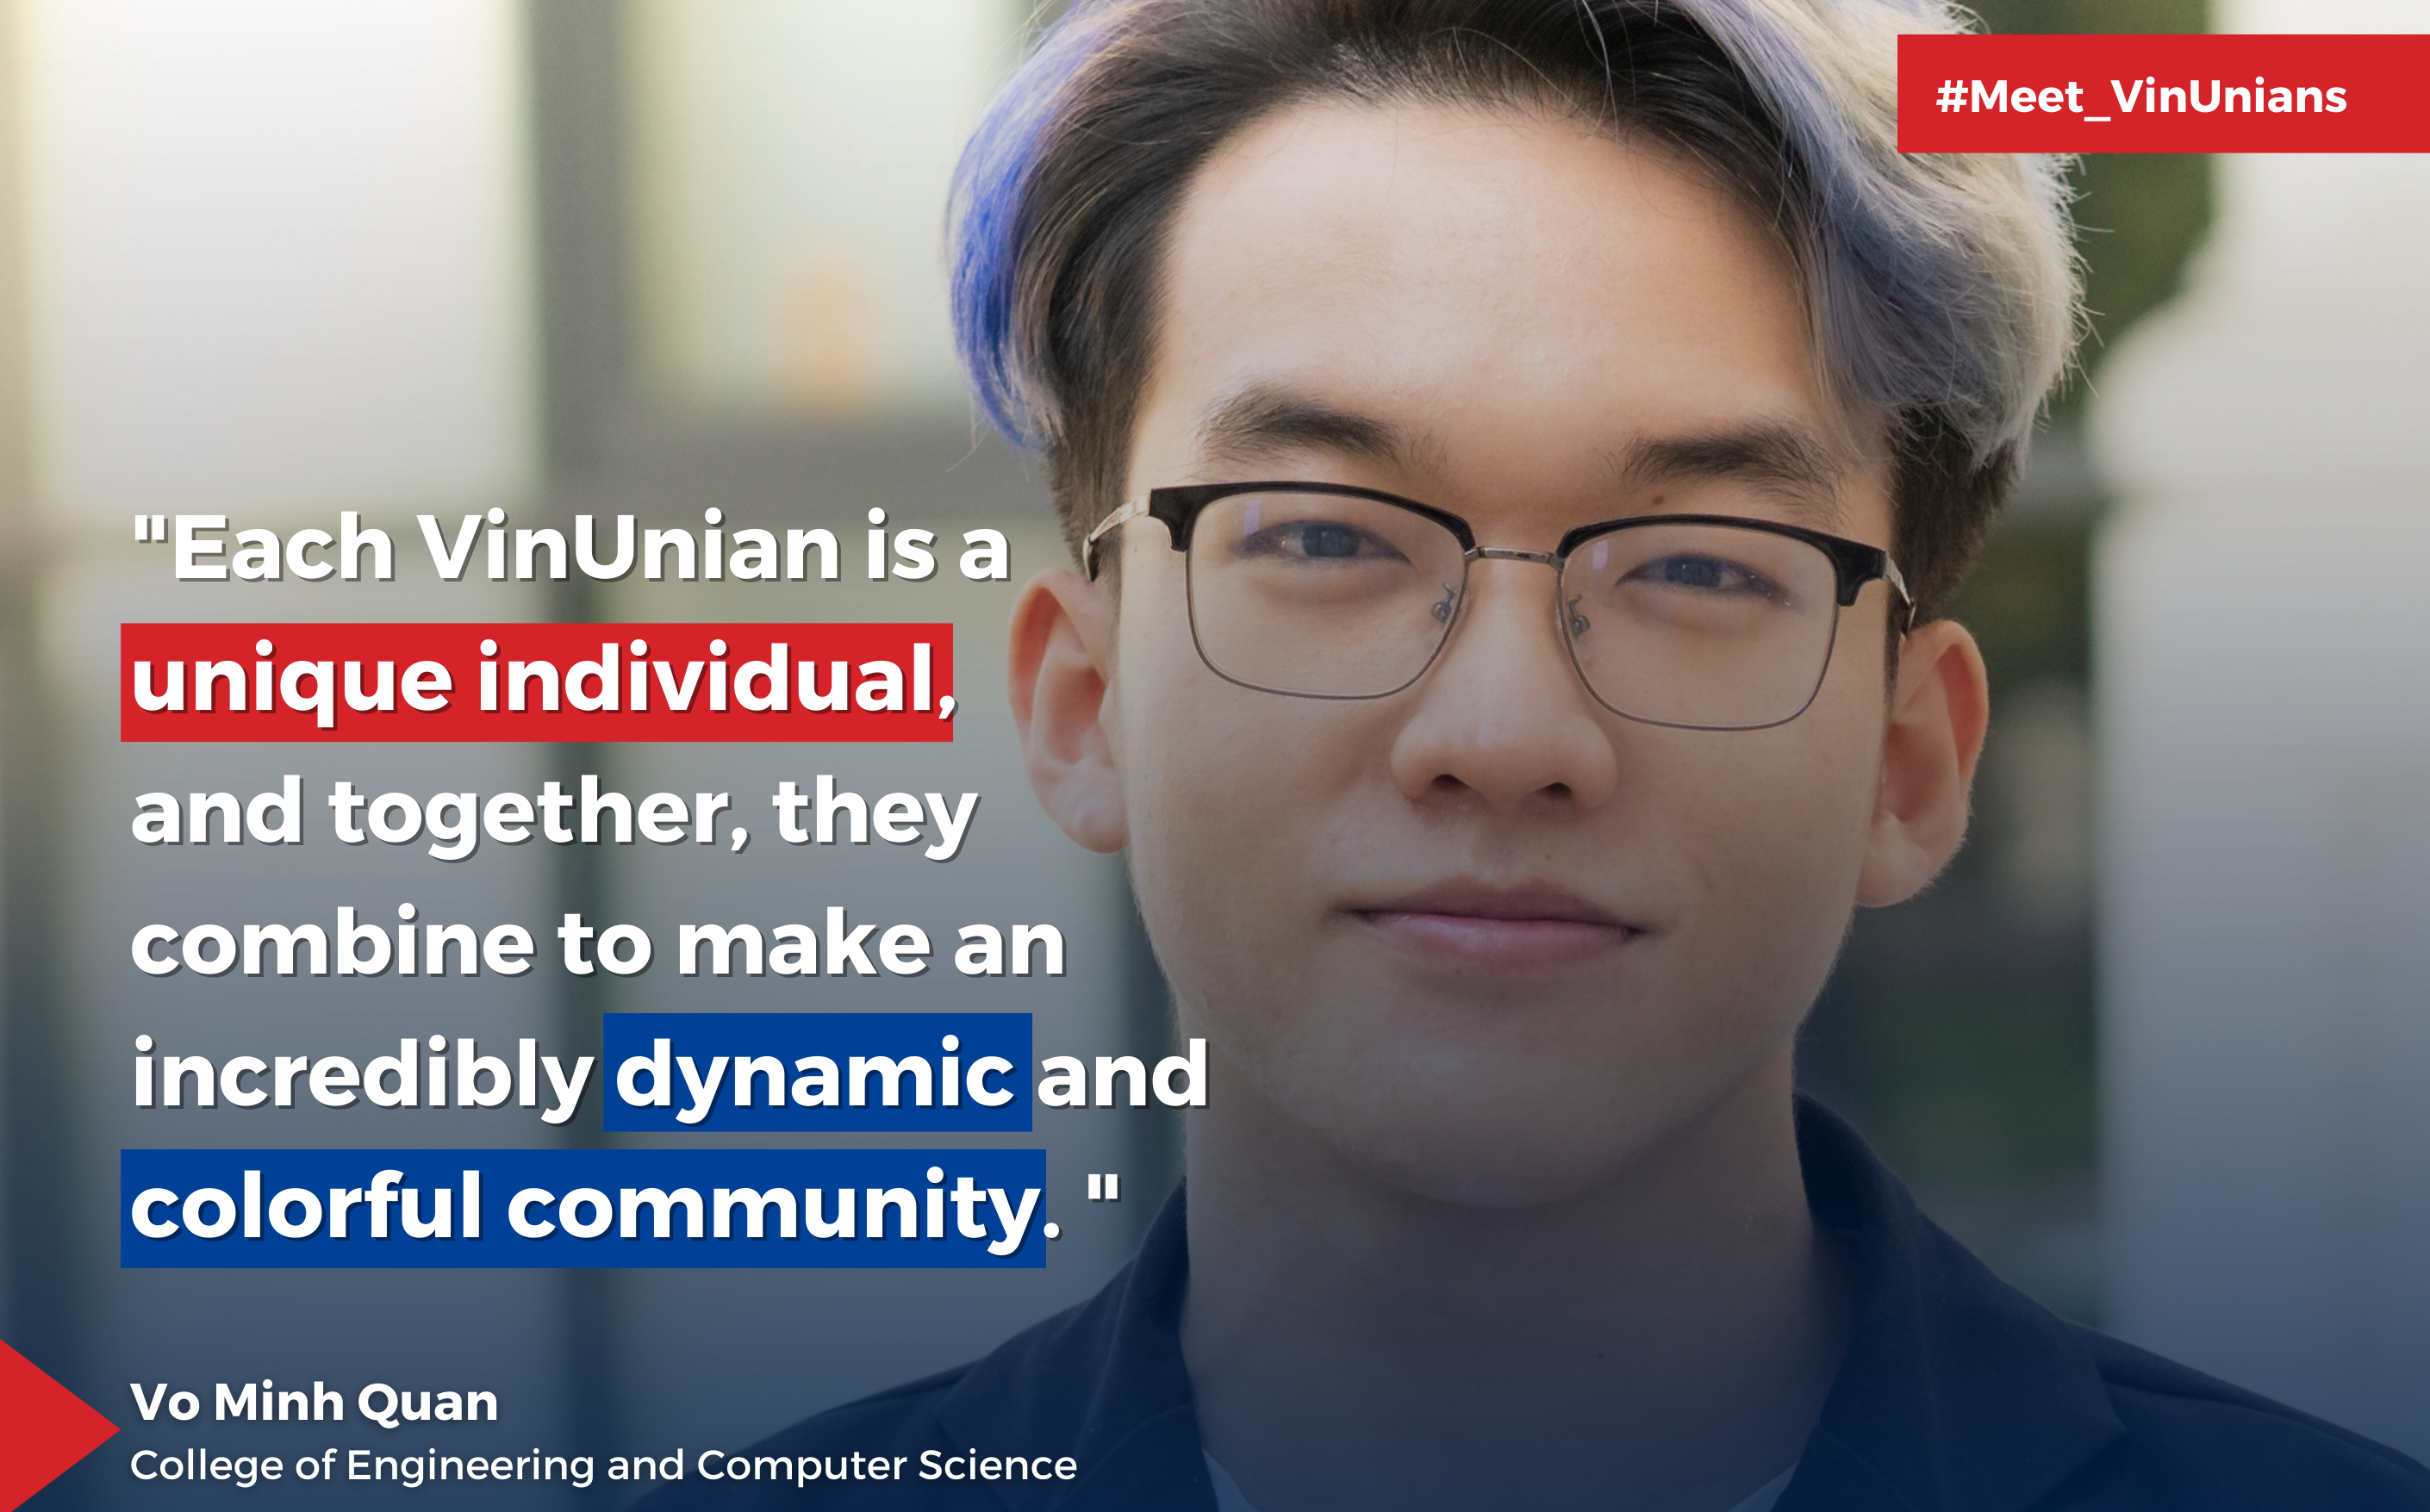 “My Student Experience at VinUni is Beyond Expectations”